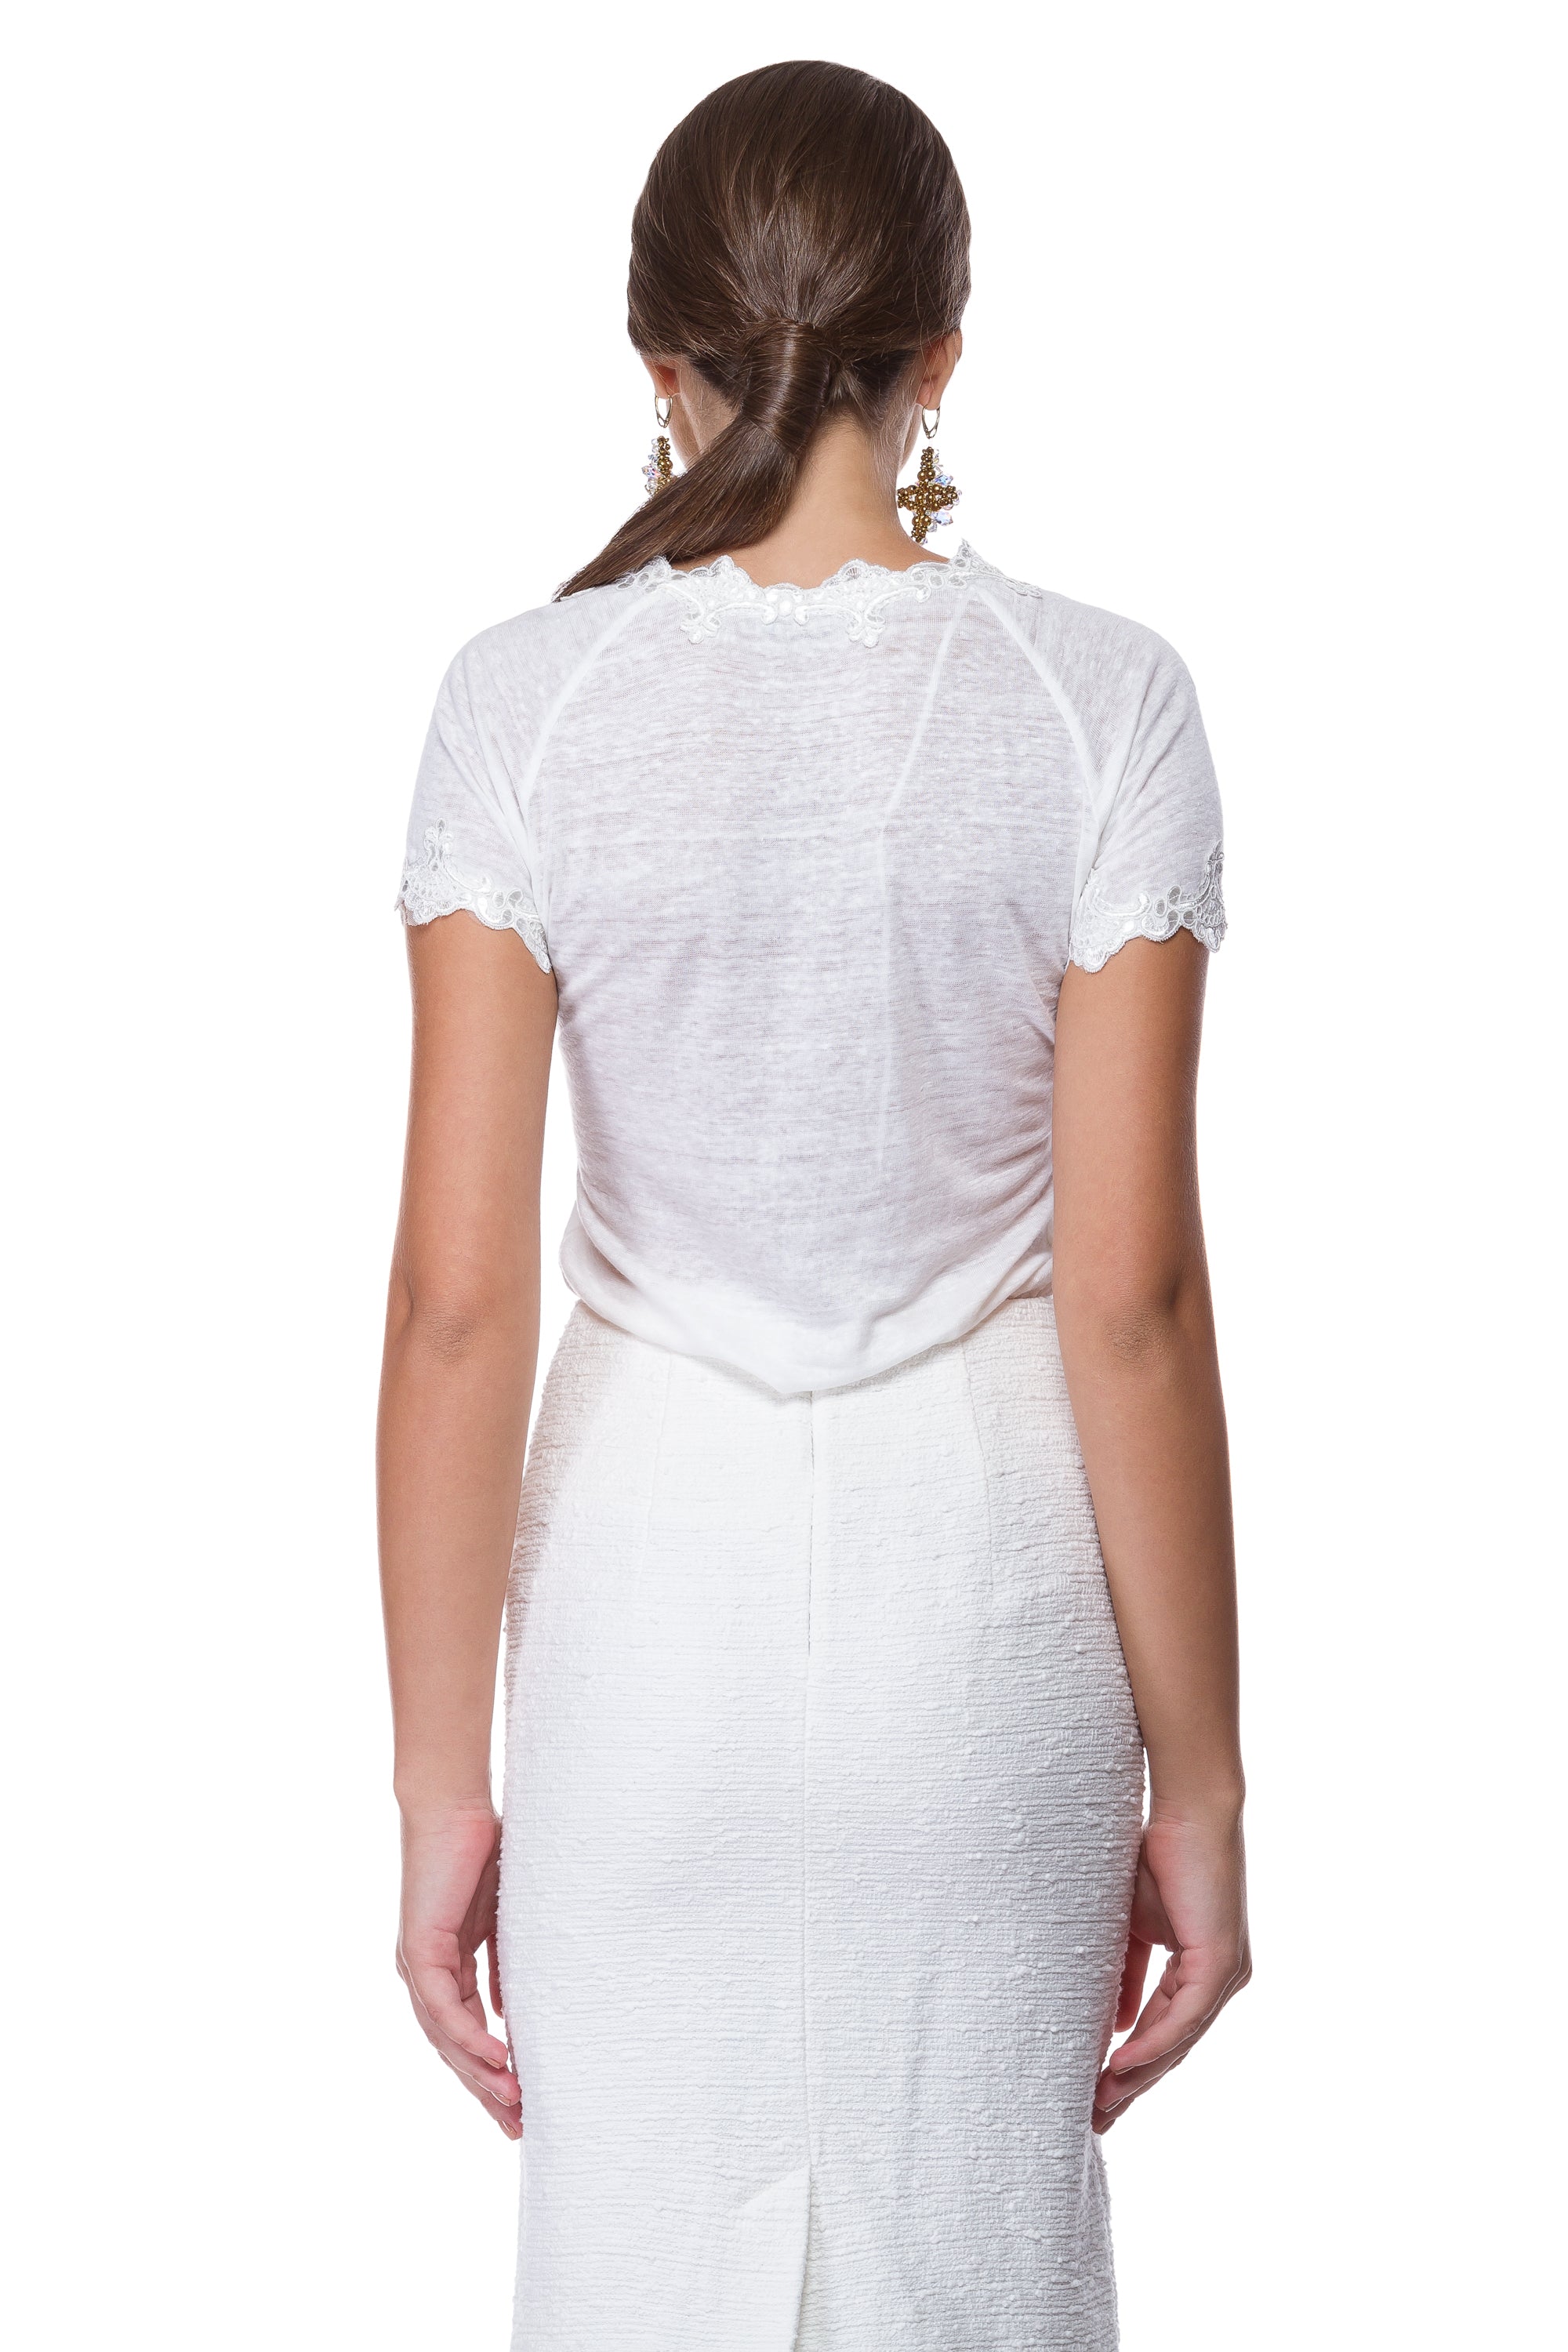 White linen blouse with Brussels lace WBL-0002